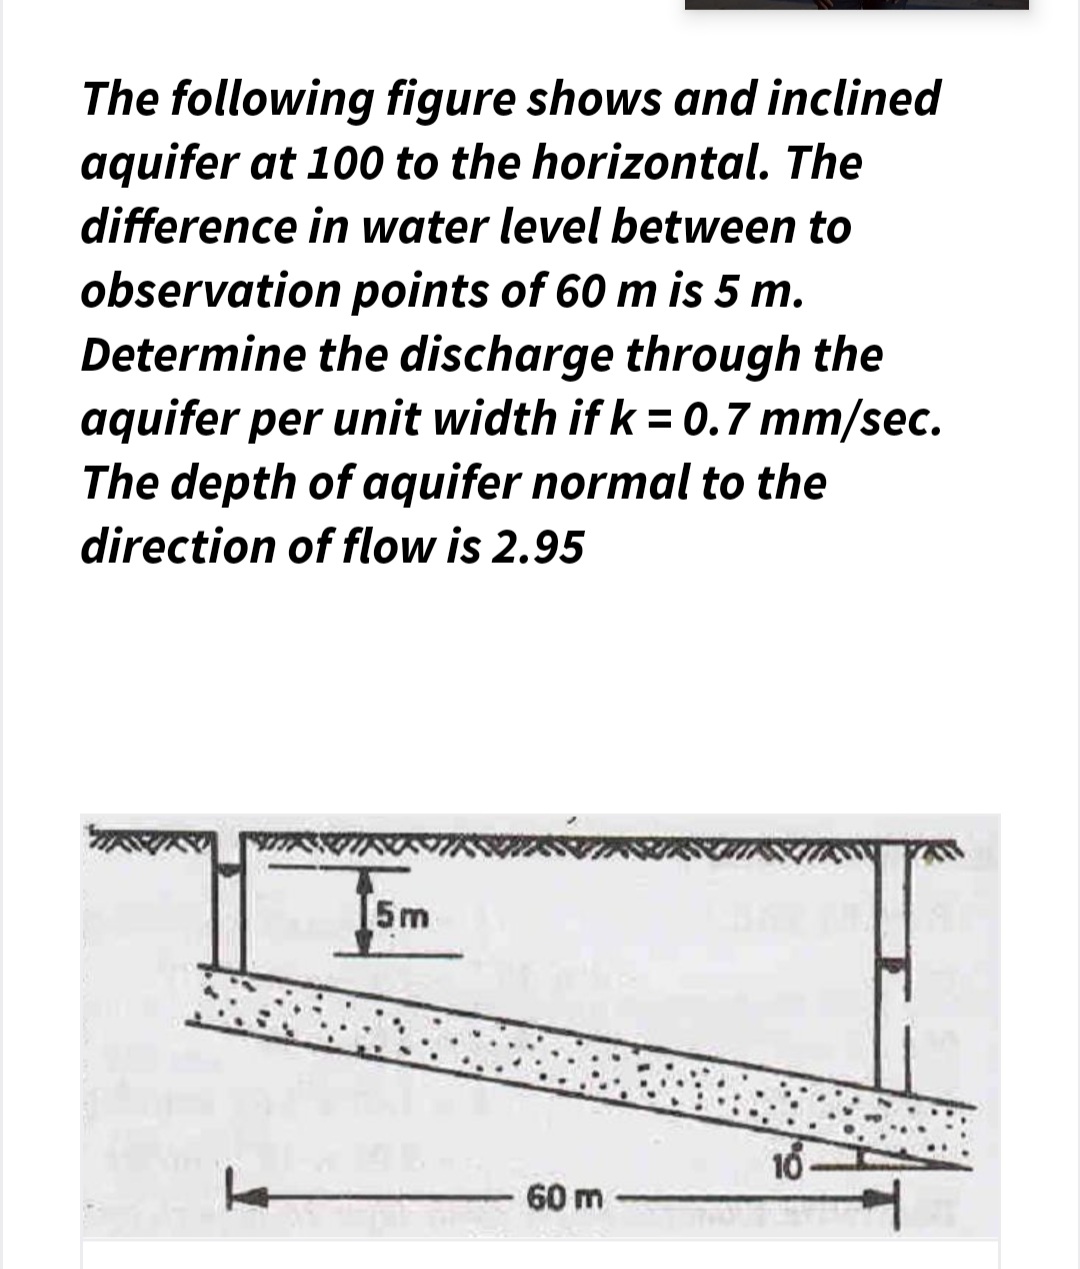 The following figure shows and inclined
aquifer at 100 to the horizontal. The
difference in water level between to
observation points of 60 m is 5 m.
Determine the discharge through the
aquifer per unit width if k = 0.7 mm/sec.
The depth of aquifer normal to the
%3D
direction of flow is 2.95
I5m
16
60 m
